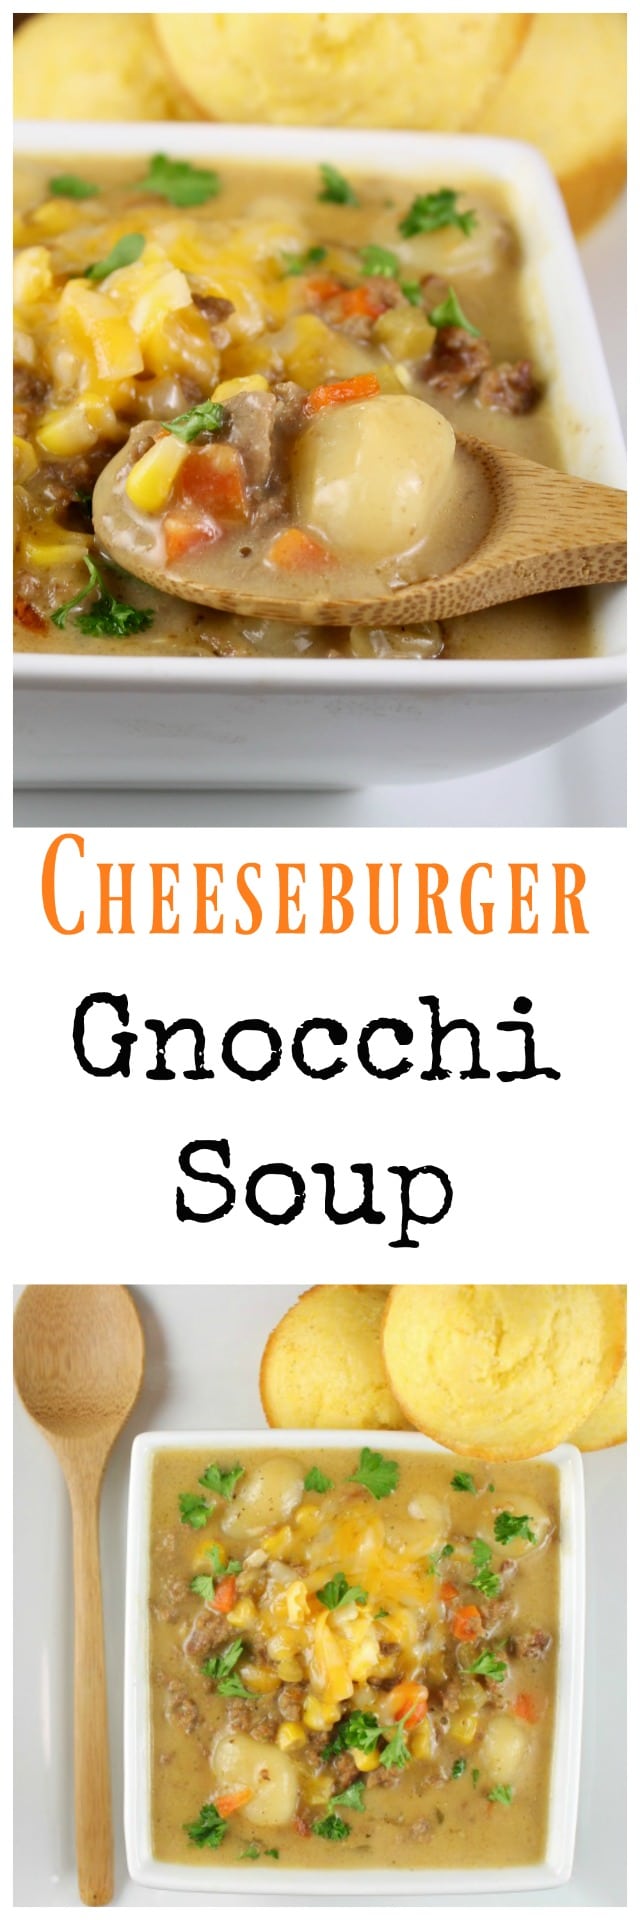 Cheeseburger Gnocchi Soup is the perfect comfort food to warm you right up on a cold evening! This is an easy and delicious dinner that the entire family can agree on. Recipe from MissintheKitchen.com